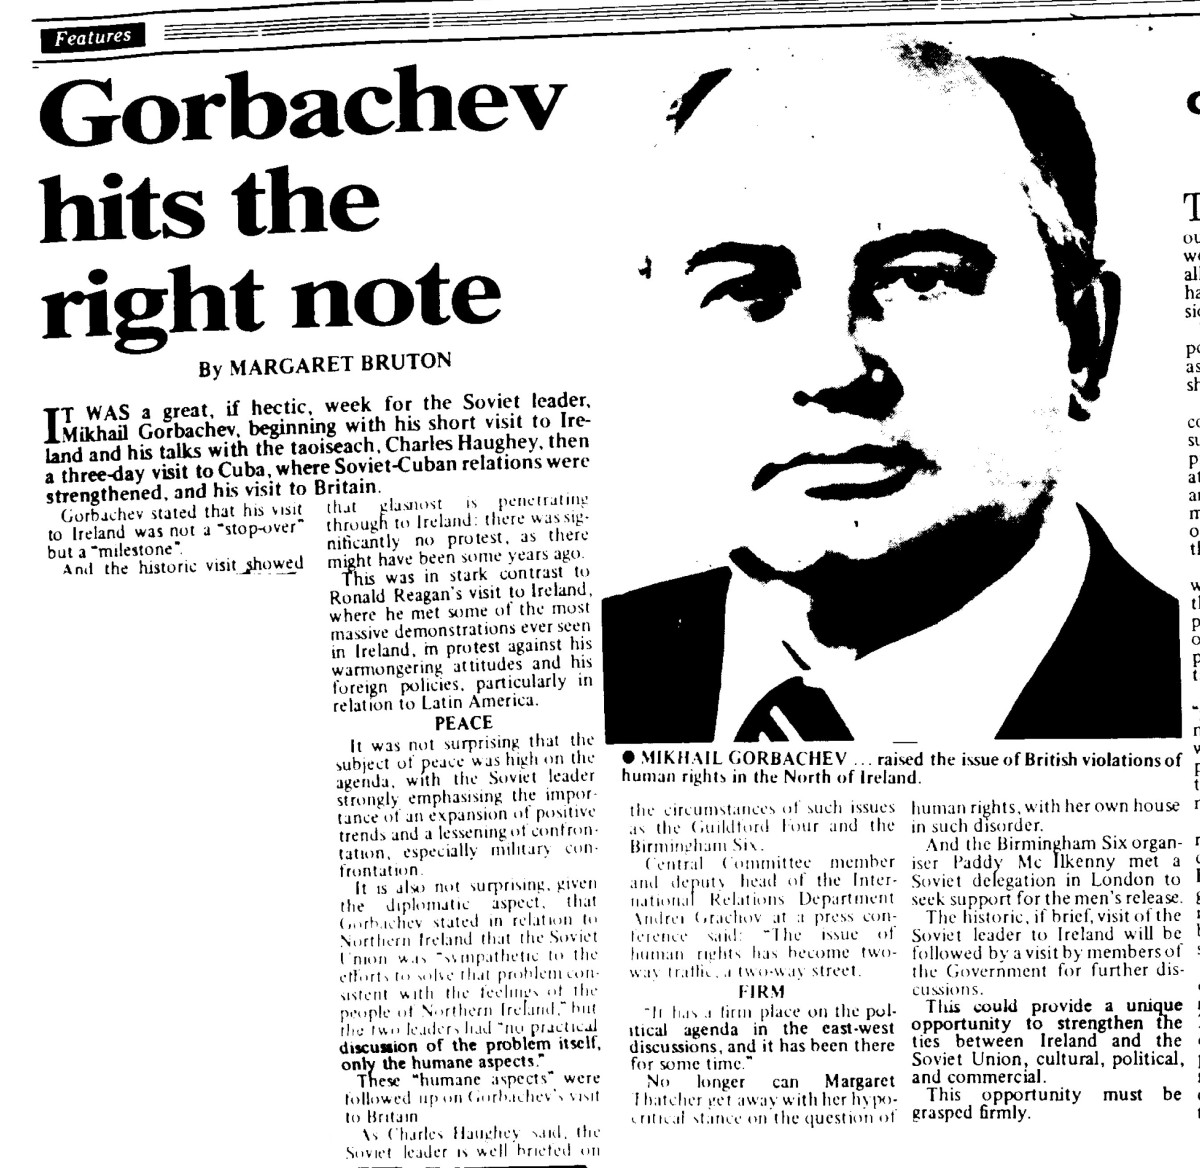 Gorbachev Hits the Right Note, by Margaret Bruton

It was a great, if hectic, week for the Soviet leader, Mikhail Gorbachev, beginning with his short visit to Ireland and his talks with the taoiseach, Charles Haughey, then a three-day visit to Cuba, where Soviet-Cuban relations were strengthened. and his visit to Britain.

Gorbachev stated that his visit to Ireland was not a "stop-over" but a "milestone".

And the historic visit showed that glasnost is penetrating through to Ireland: there was significantly no protest, as there might have been some years ago.
This was in stark contrast to Ronald Reagan’s visit to Ireland, where he met some of the most massive demonstrations ever seen in Ireland, in protest against his warmongering attitudes and his foreign policies, particularly in relation to Latin America.

PEACE

It was not surprising that the subject of peace was high on the agenda, with the Soviet leader strongly emphasising the importance of an expansion of positive trends and a lessening of confrontation, especially military confrontation.

It is also not surprising, given the diplomatic aspect, that Gorbachev stated an relation to Northern Ireland that the Soviet Union was "sympathetic to the efforts to solve that problem consistent with the feelings of the people of Northern Ireland", but the two leaders had "no practical discussion of the problem itself, only the humane aspects.”

These “humane aspects” were followed on Gorbachev's visit to Britain.

As Charles Haughey said, the Soviet leader is well briefed on the circumstances of such issues as the Guildford Four and the Birmingham Six.

Central Committee member and deputy head of the International Relations Department Andrei Grachev at i press conference said: “The issue of human rights has become two-way traffic, a two-way street.

FIRM

"It has o firm place on the political agenda in the east-west discussions and it has been there for some time.”

No  longer can Margaret Thatcher vet away with her hypocritical stance on the question of human rights, with her own house in such disorder.

And the Birmingham Six organiser Paddy McIlkenny met a Soviet delegation in London to
seck support for the men’s release.

The historic, if brief, visit of the Soviet leader to Ireland will be followed by a visit by members of
the Government for further discussions.

This could provide a unique opportunity to strengthen the ties between Ireland and the
Soviet Union, cultural, political, and commercial. 

This opportunity must be grasped firmly.